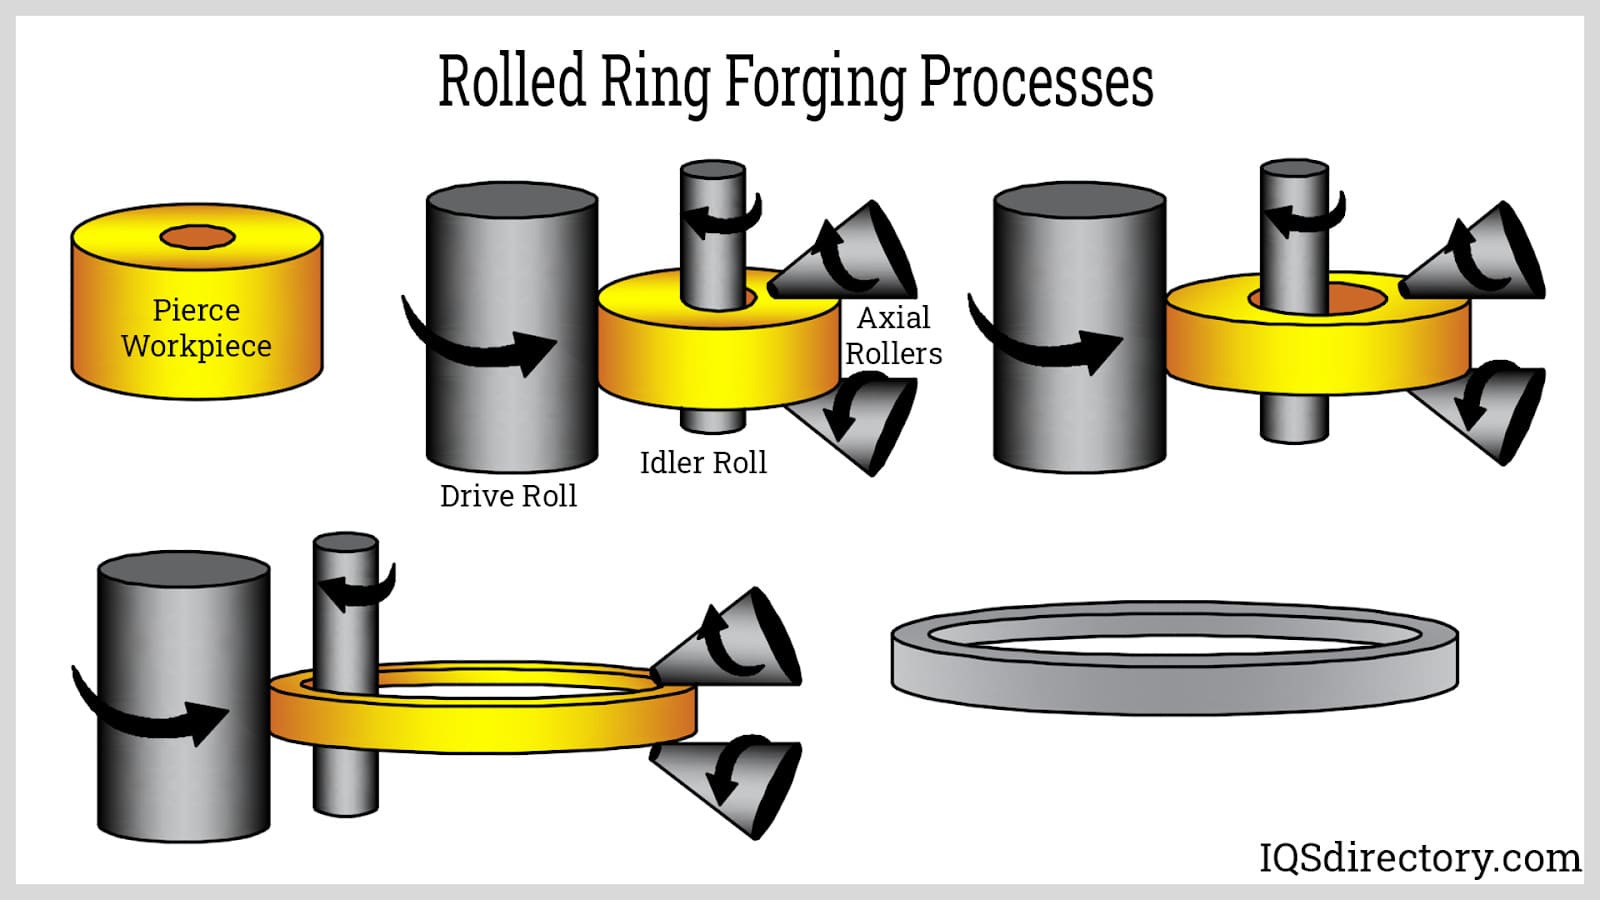 Rolled Ring Forging Processes